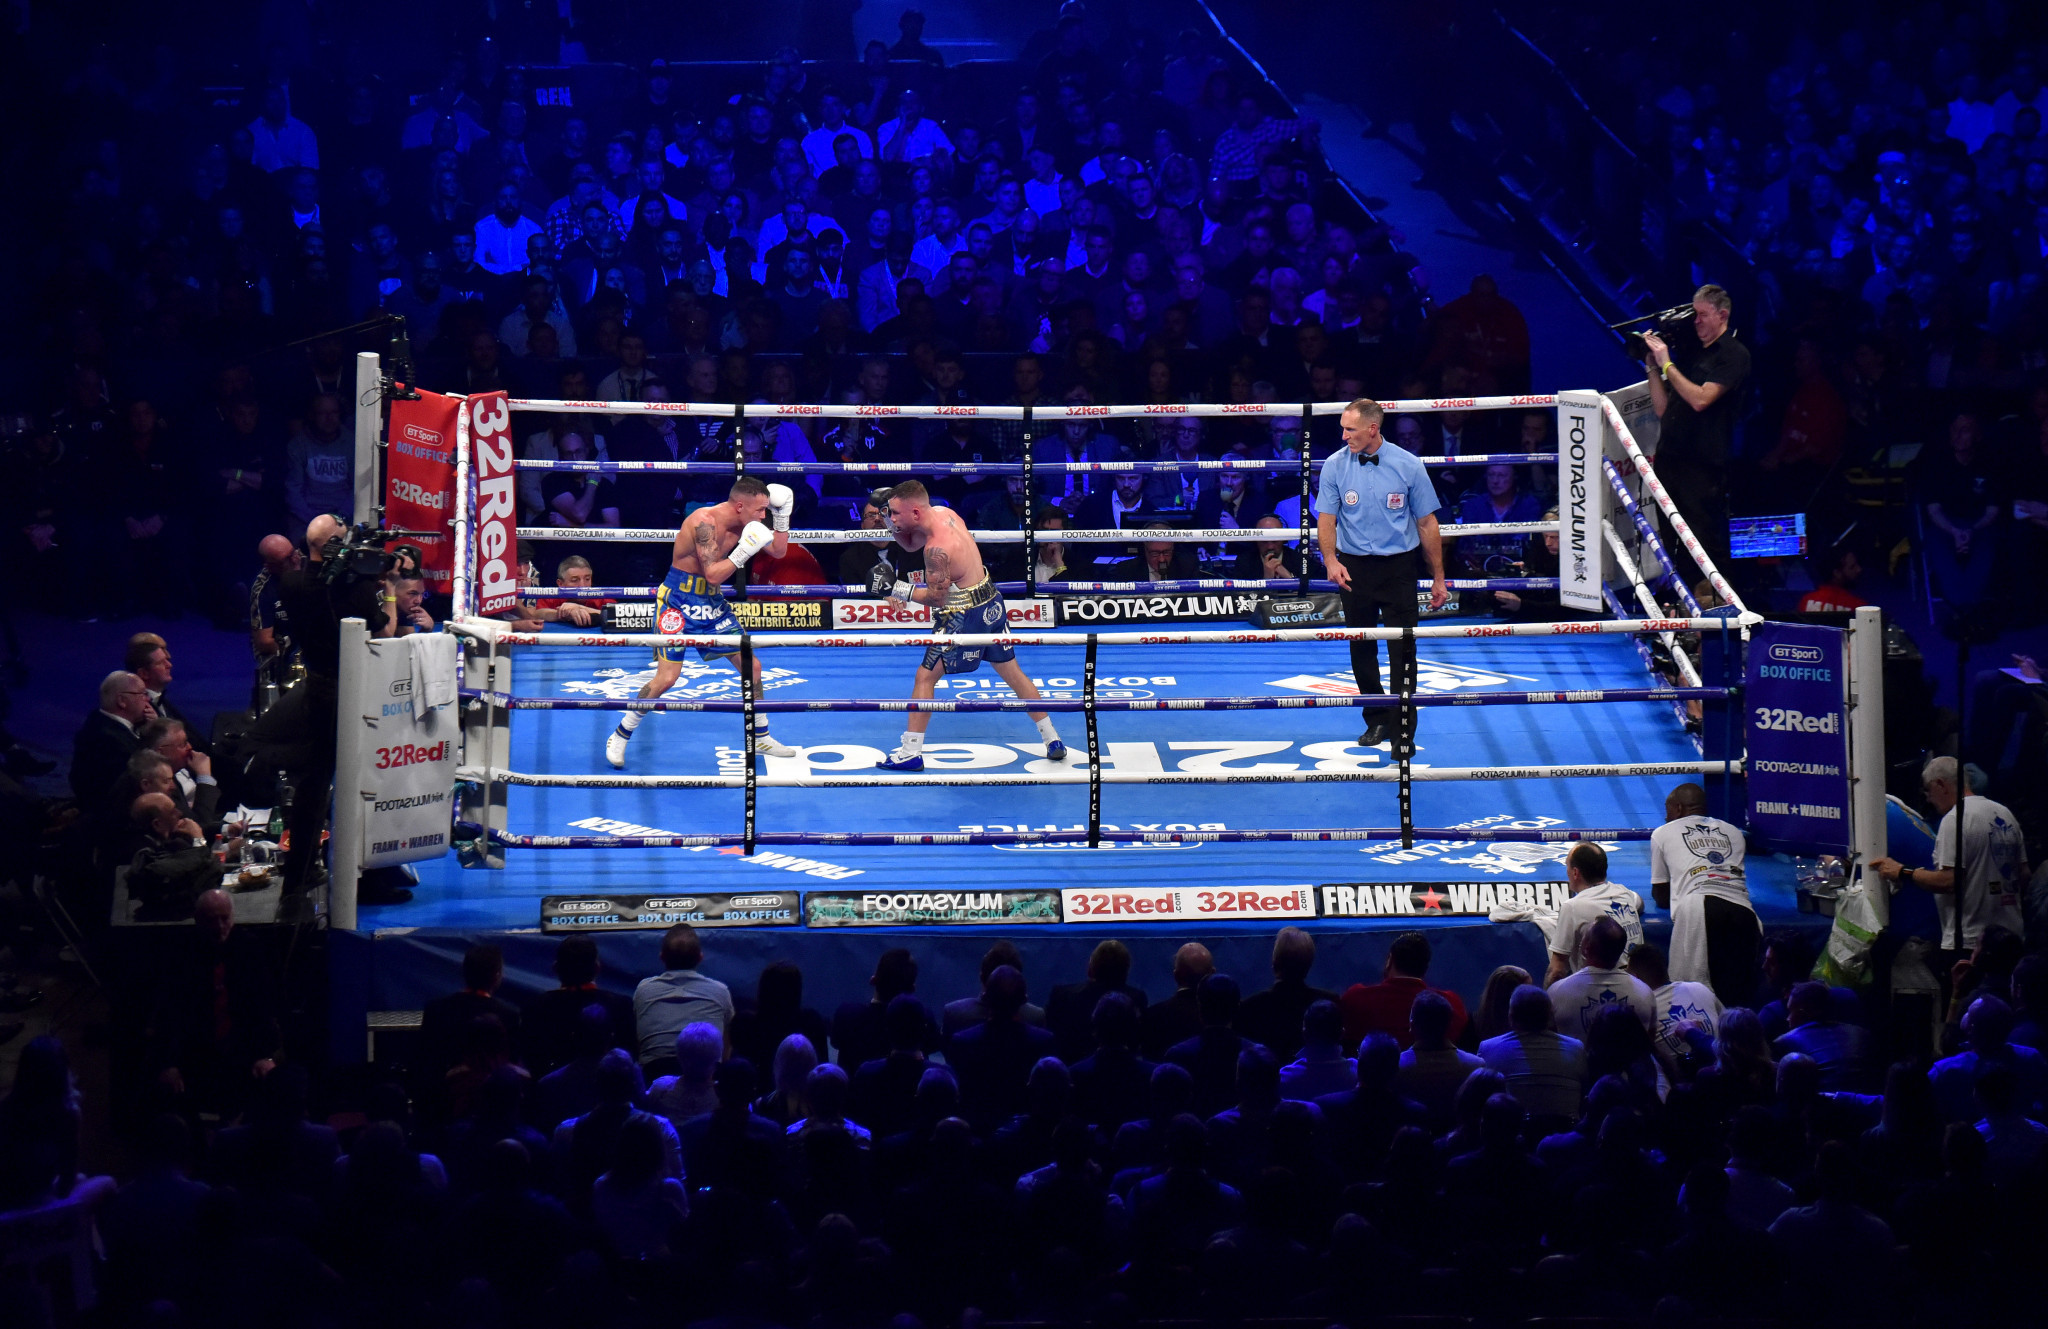 Josh Warrington successfully defended his IBF featherweight title against Carl Frampton on a brilliant night for boxing at the Manchester Arena which kept the crowd enthralled throughout ©Getty Images